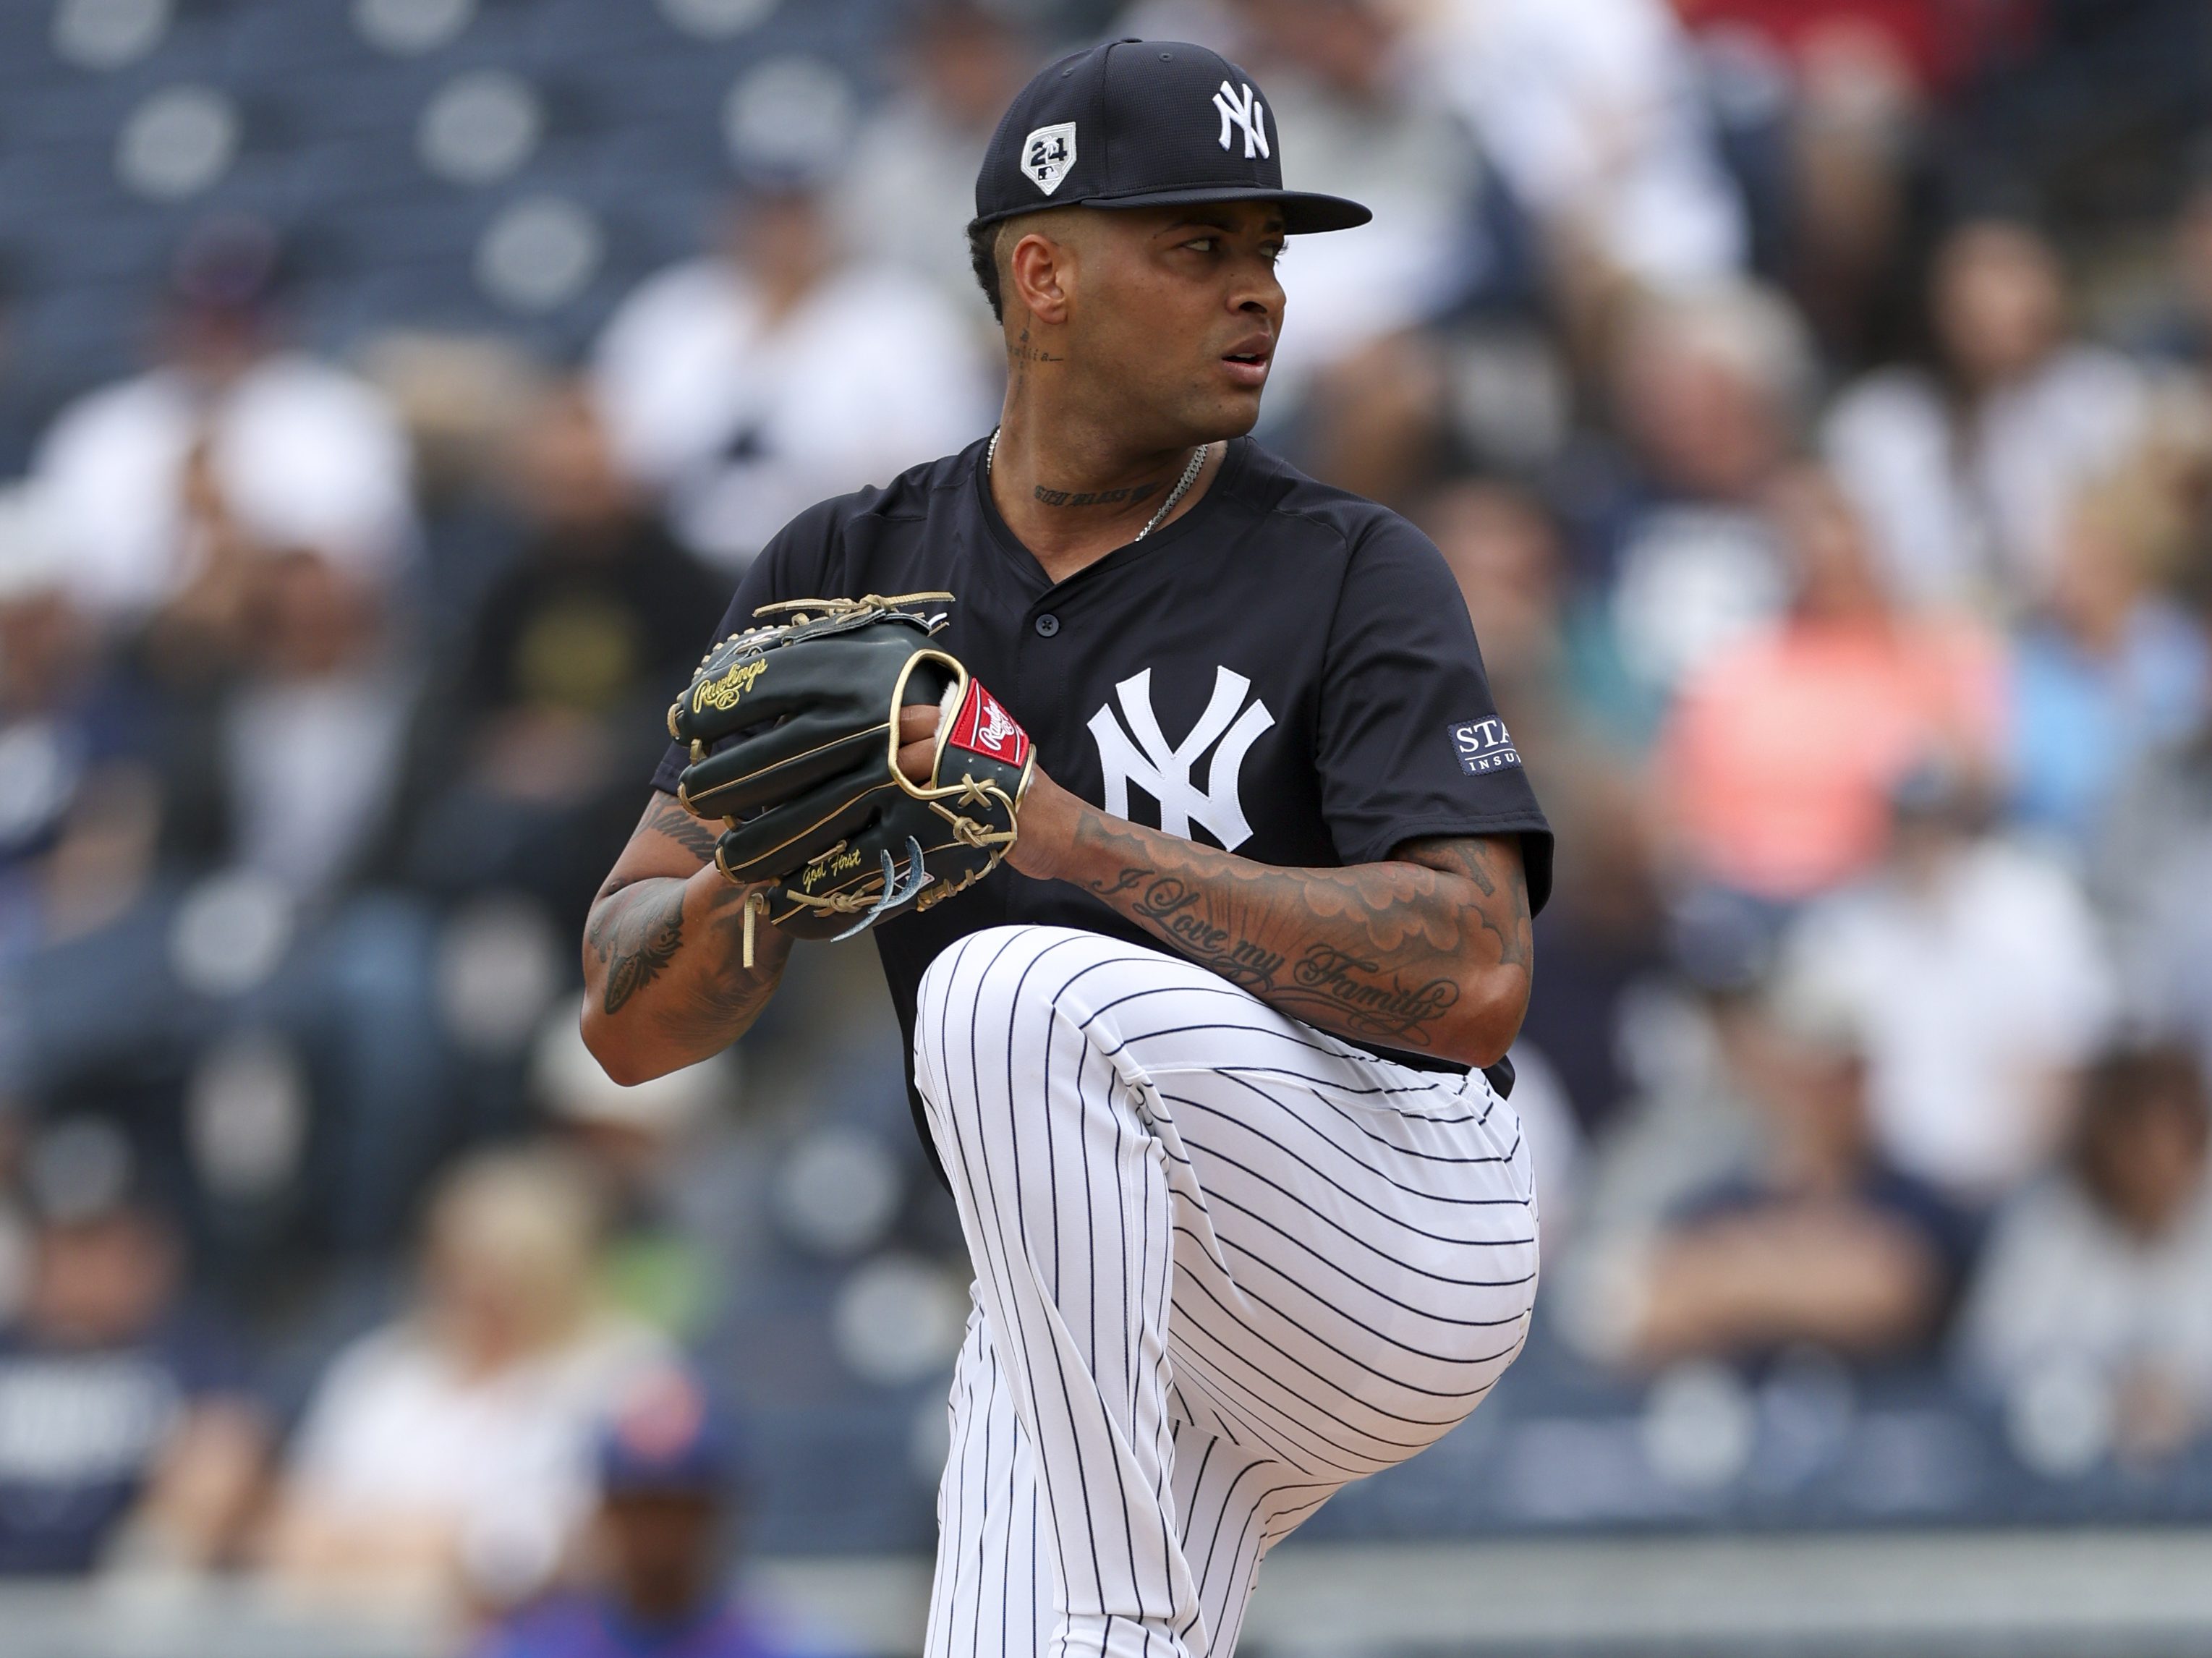 The Yankees may have a new star in the starting rotation